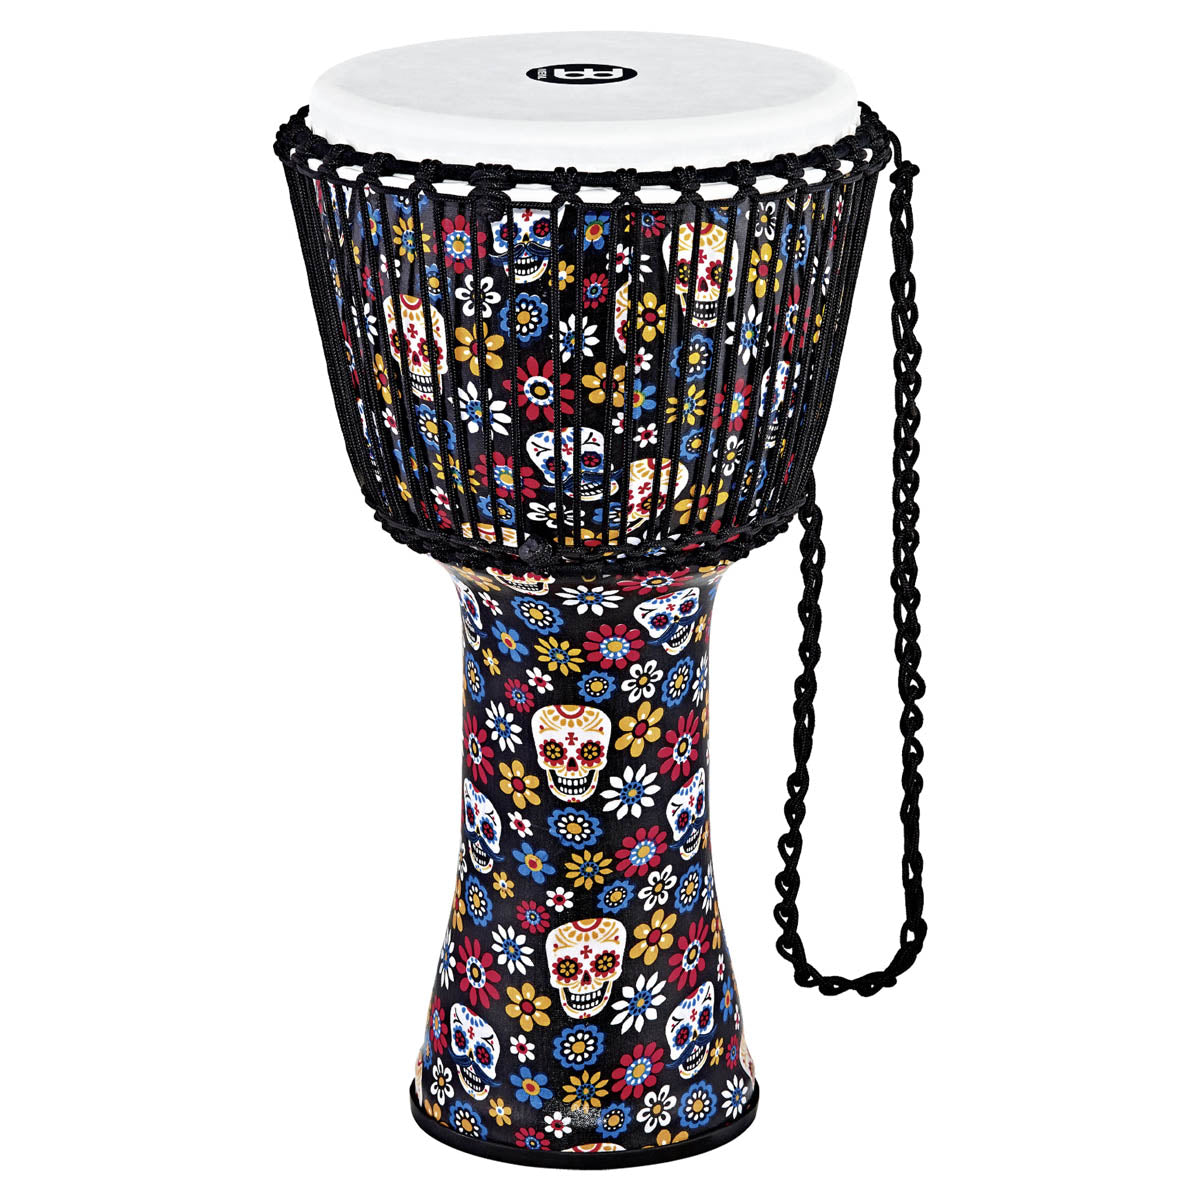 Meinl Travel Series Rope Tuned Djembe in Day Of The Dead